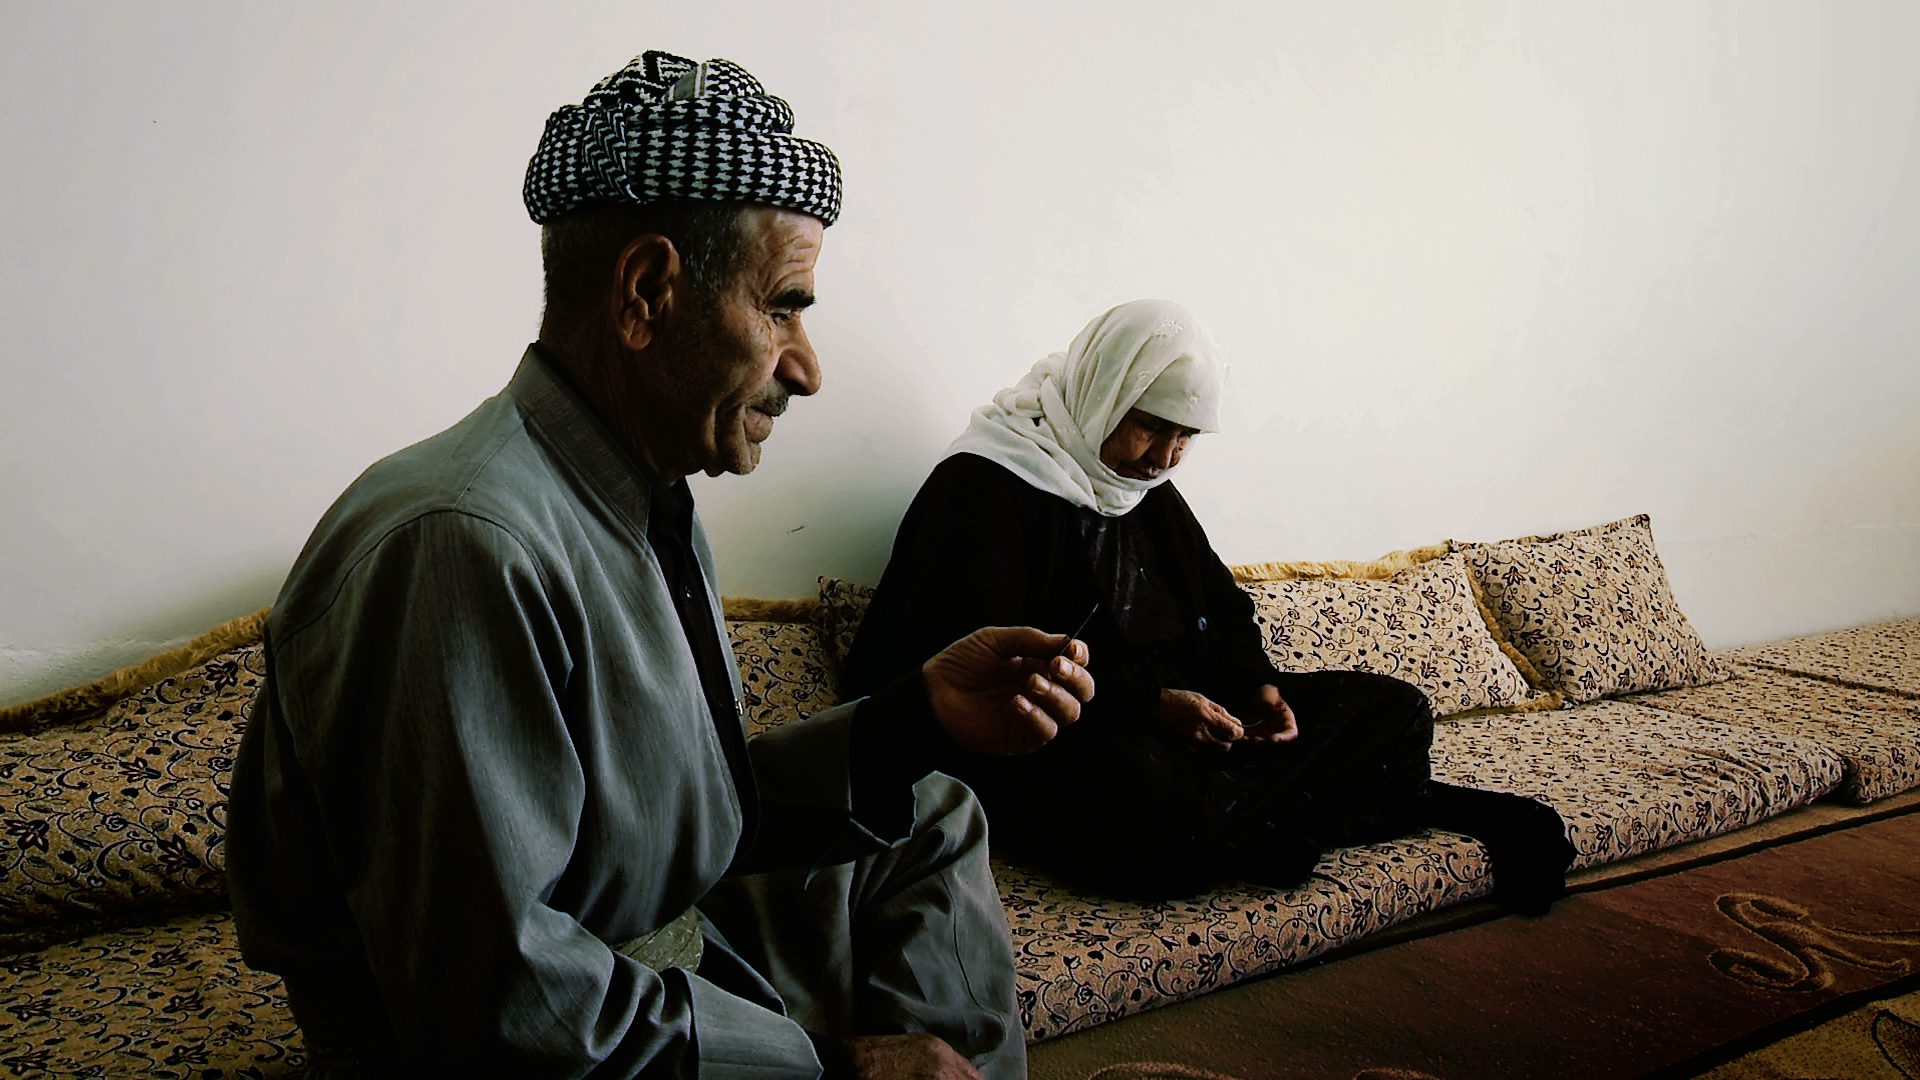 After their capture by Iraqi forces, AISHA HAJI SALAM and her husband ADAM MOHAMMED YOUNES were separated in Nizarka prison in Dohuk. Women and children were moved to a guarded camp near Erbil where Aisha would spend the next three years of her life.